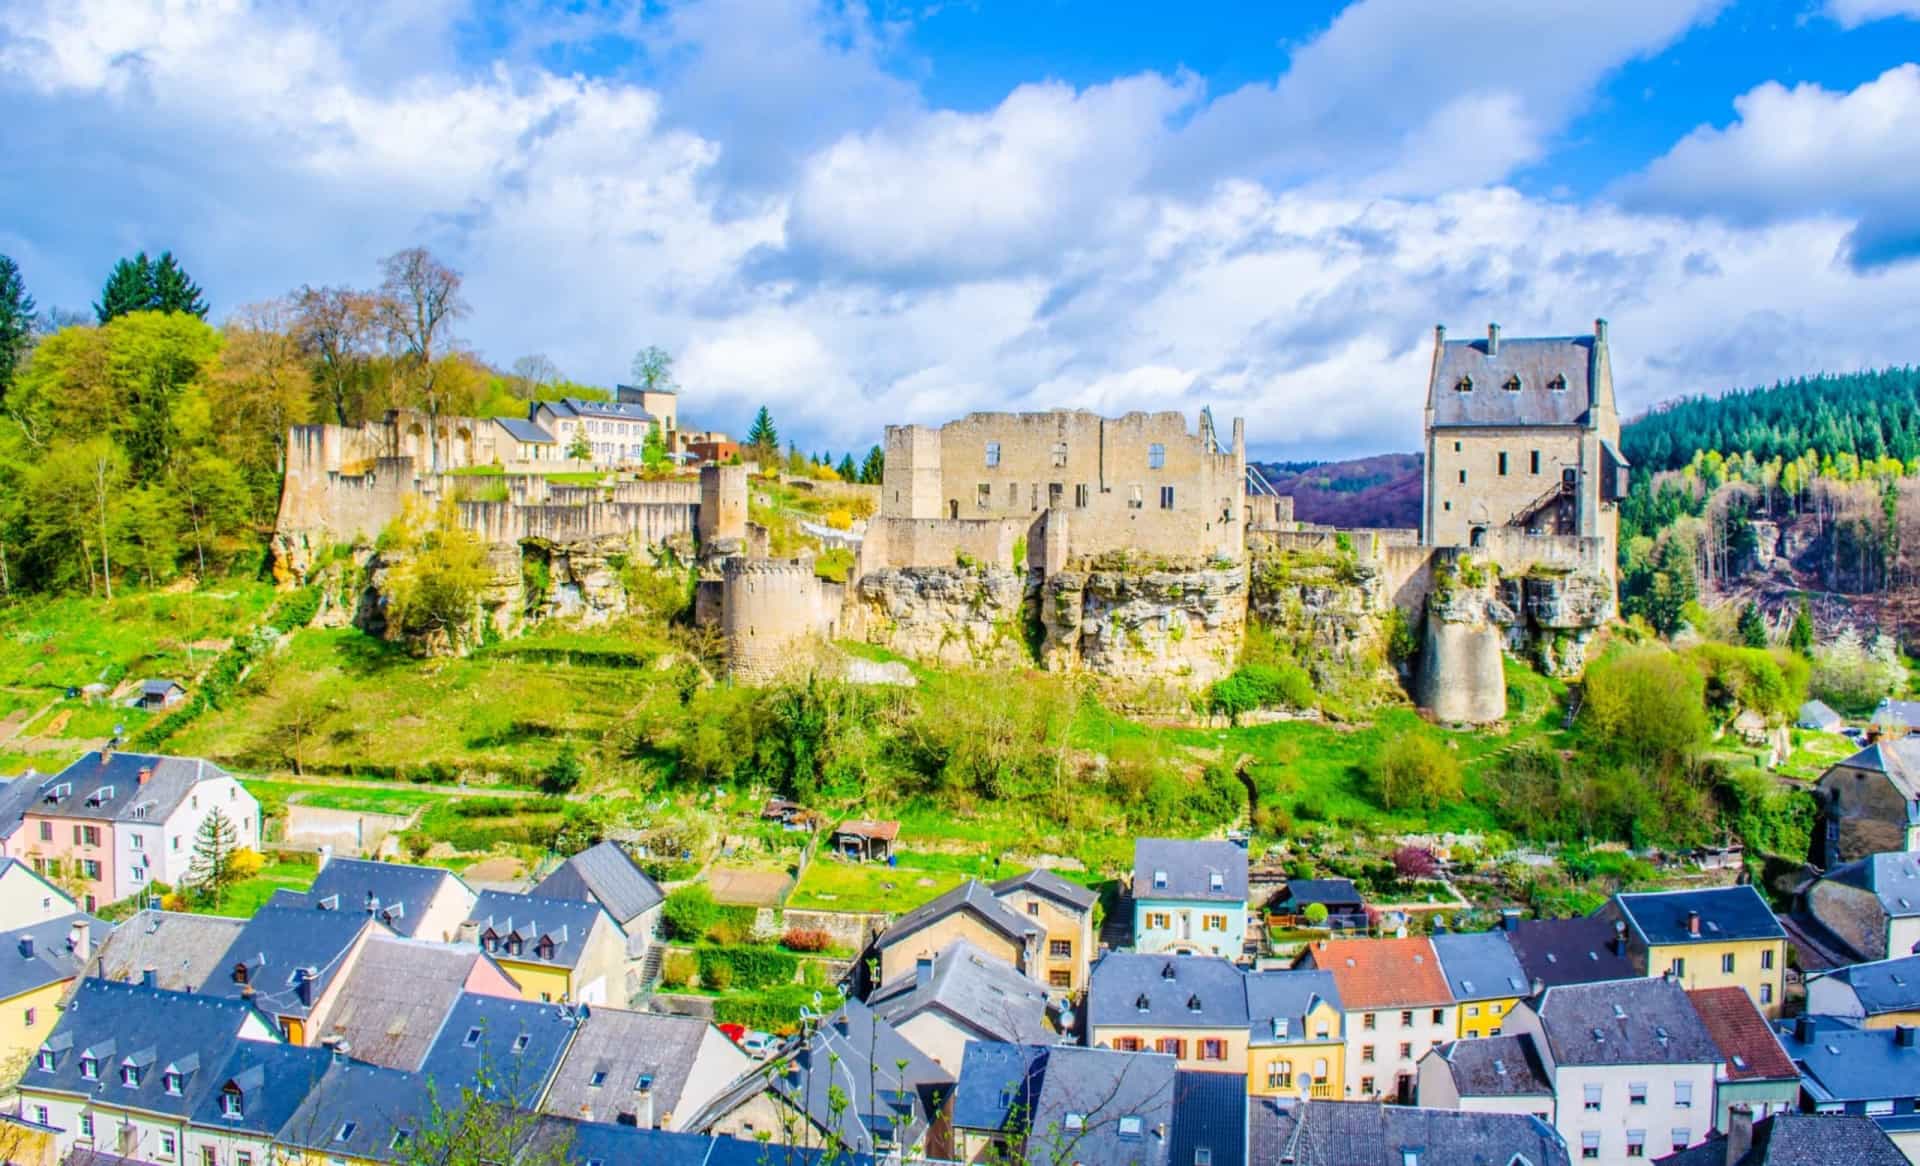 <p>The partly ruined 11th-century Larochette Castle dominates the skyline of its namesake town, located in central Luxembourg. Visitors find the castle much as it was left in the 16th century, after fire destroyed most of the building.</p>